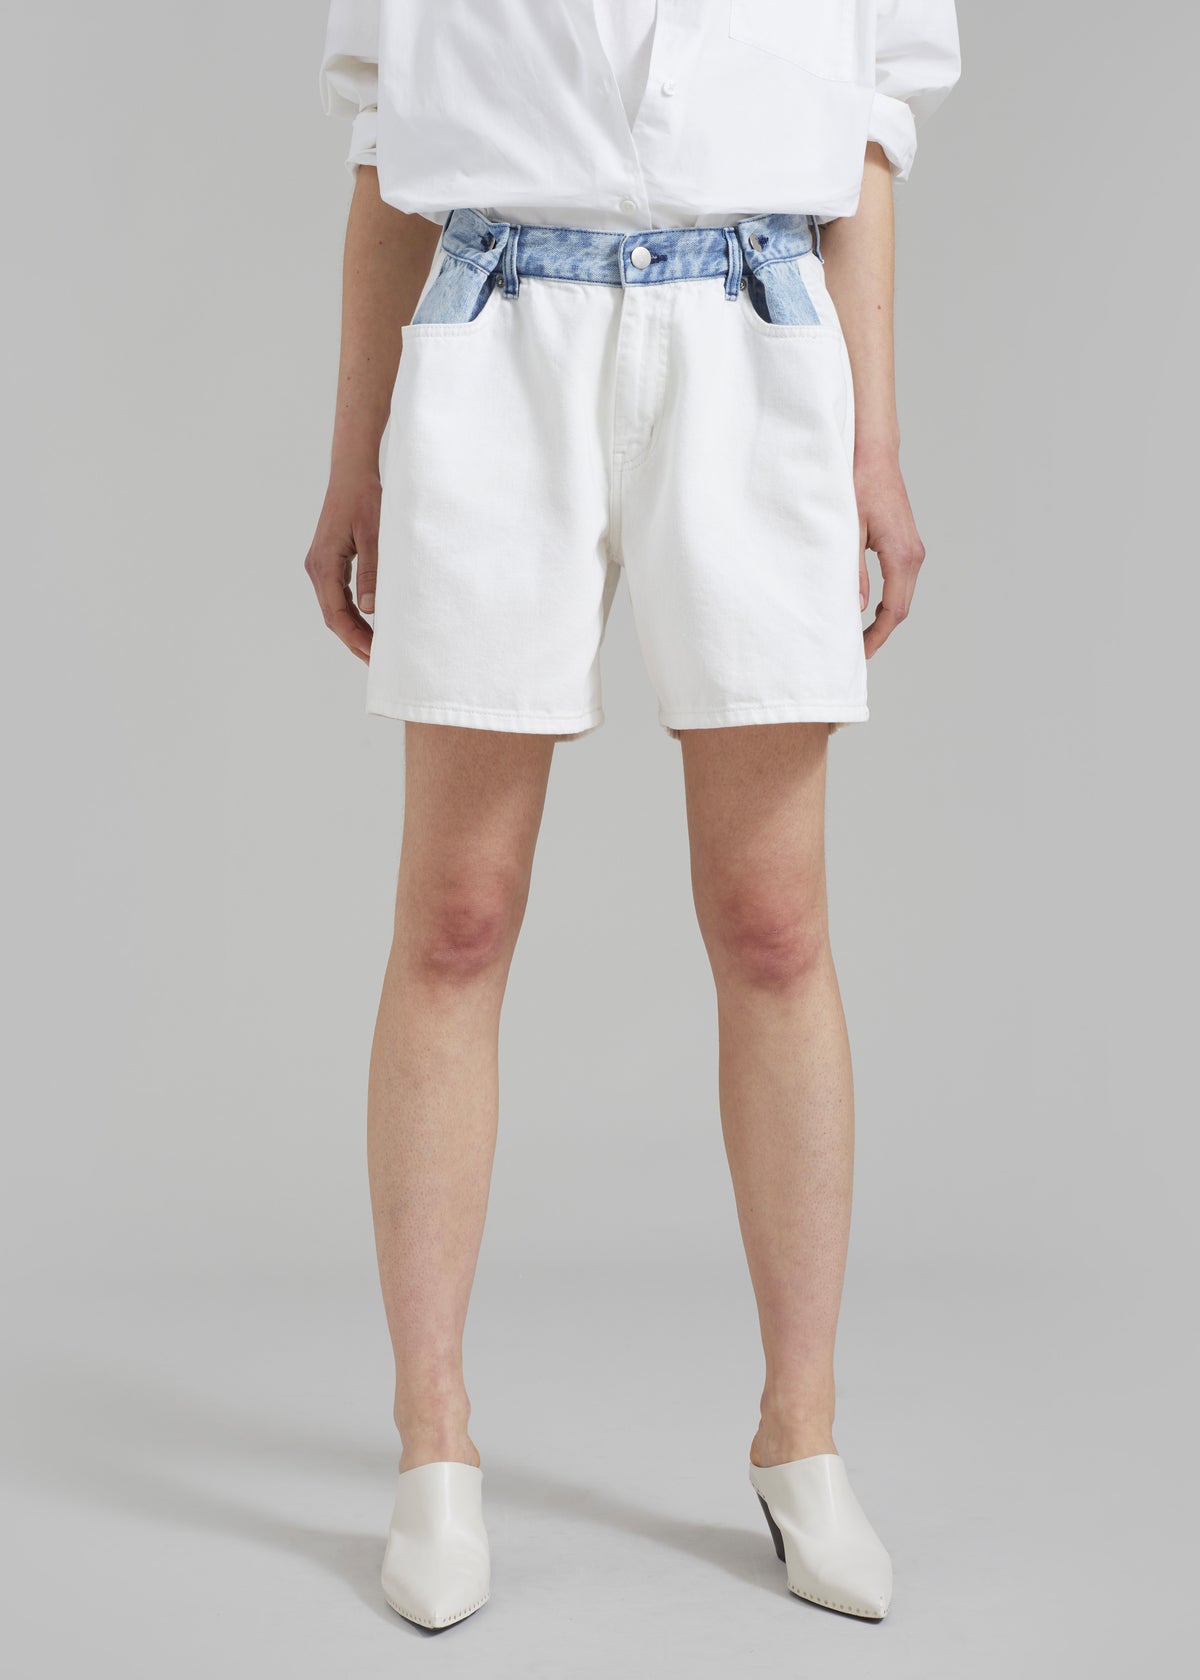 will The more Off buy, Denim Frankie you larger Shop you - the receive The Shorts discount Contrast White/Blue Hayla